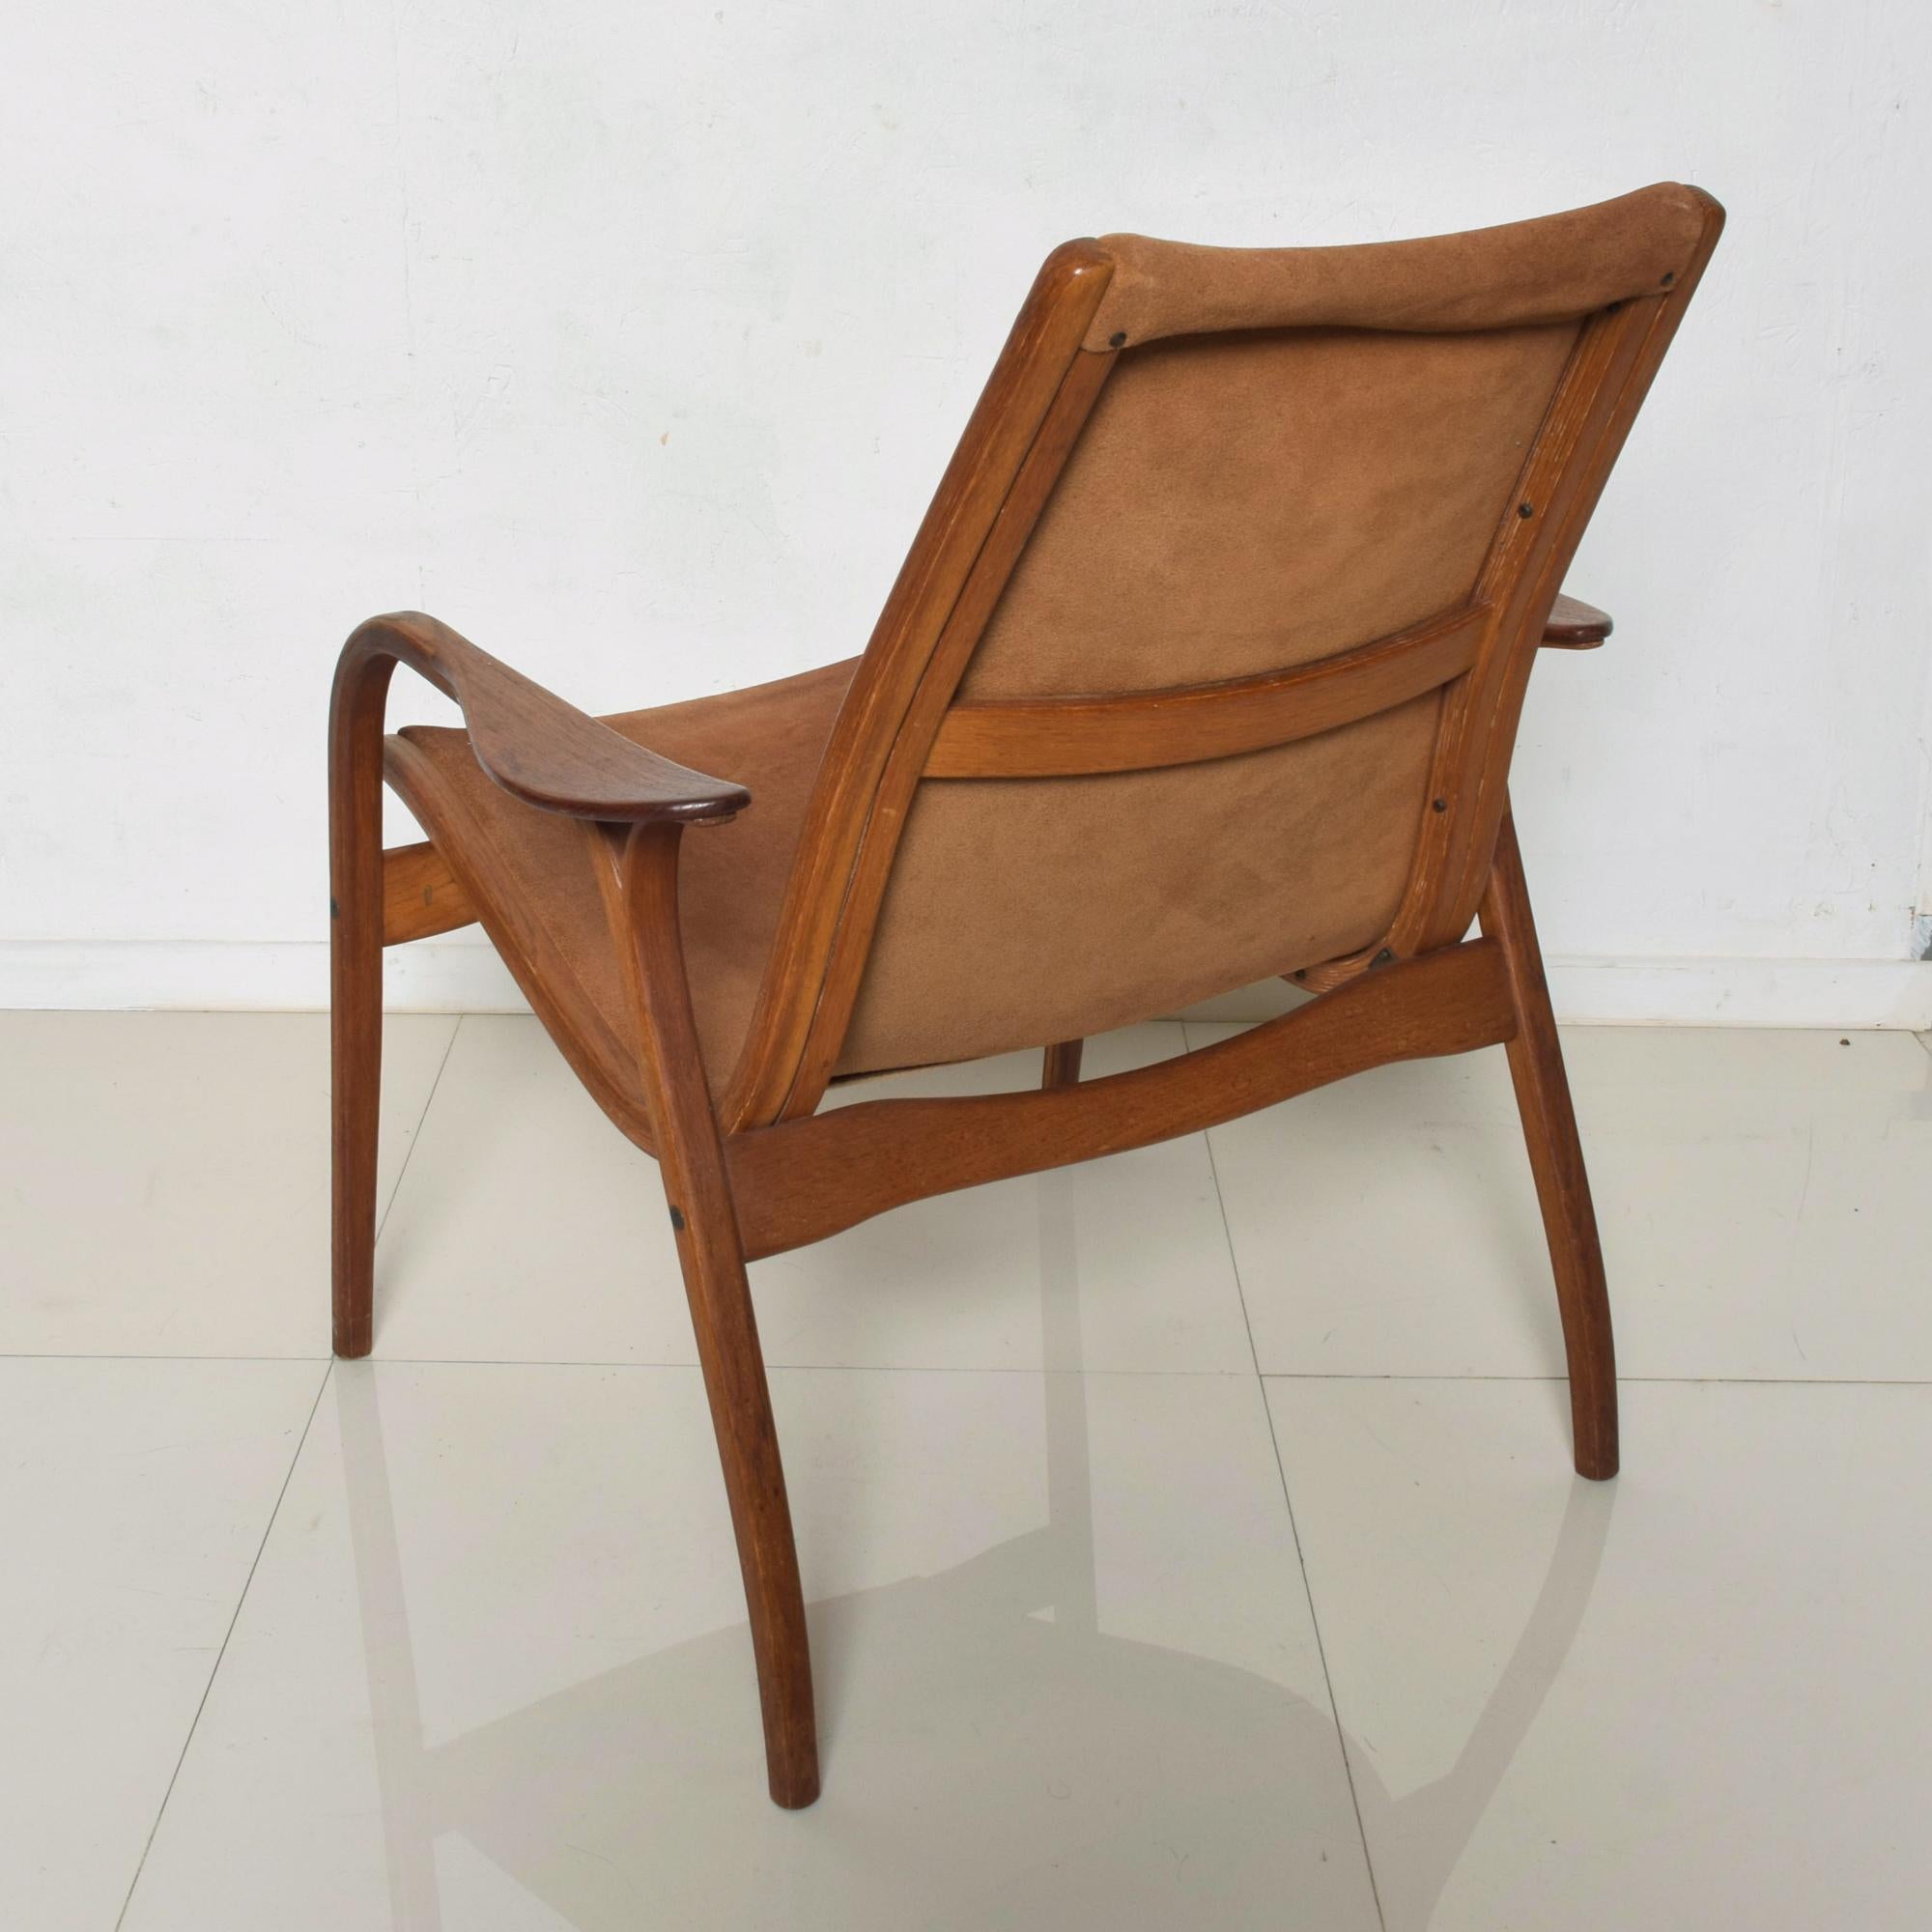 Mid-20th Century Luxury Lamino Lounge Chair Cognac Leather & Wood by Yngve Ekstrom for Swedese